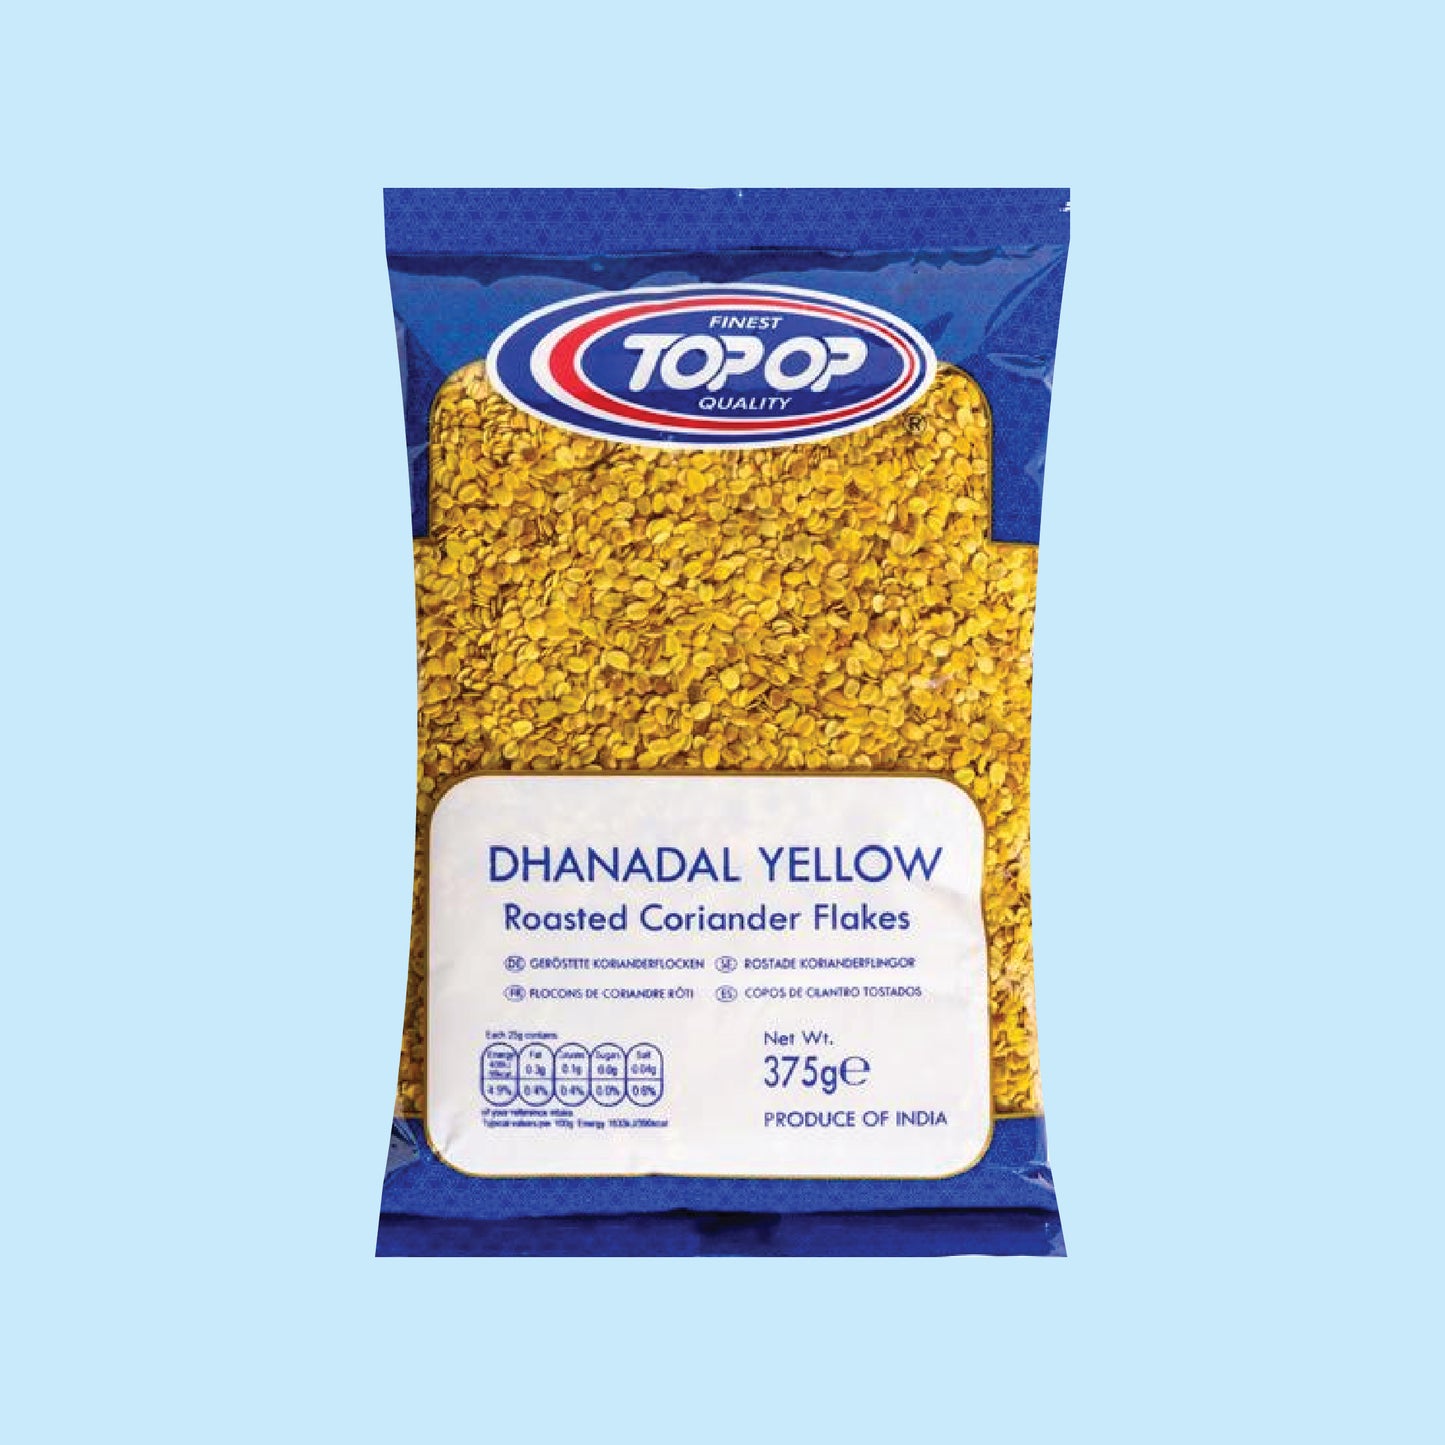 Top-Op Dhana Dal Yellow (Roasted Coriander Flakes)